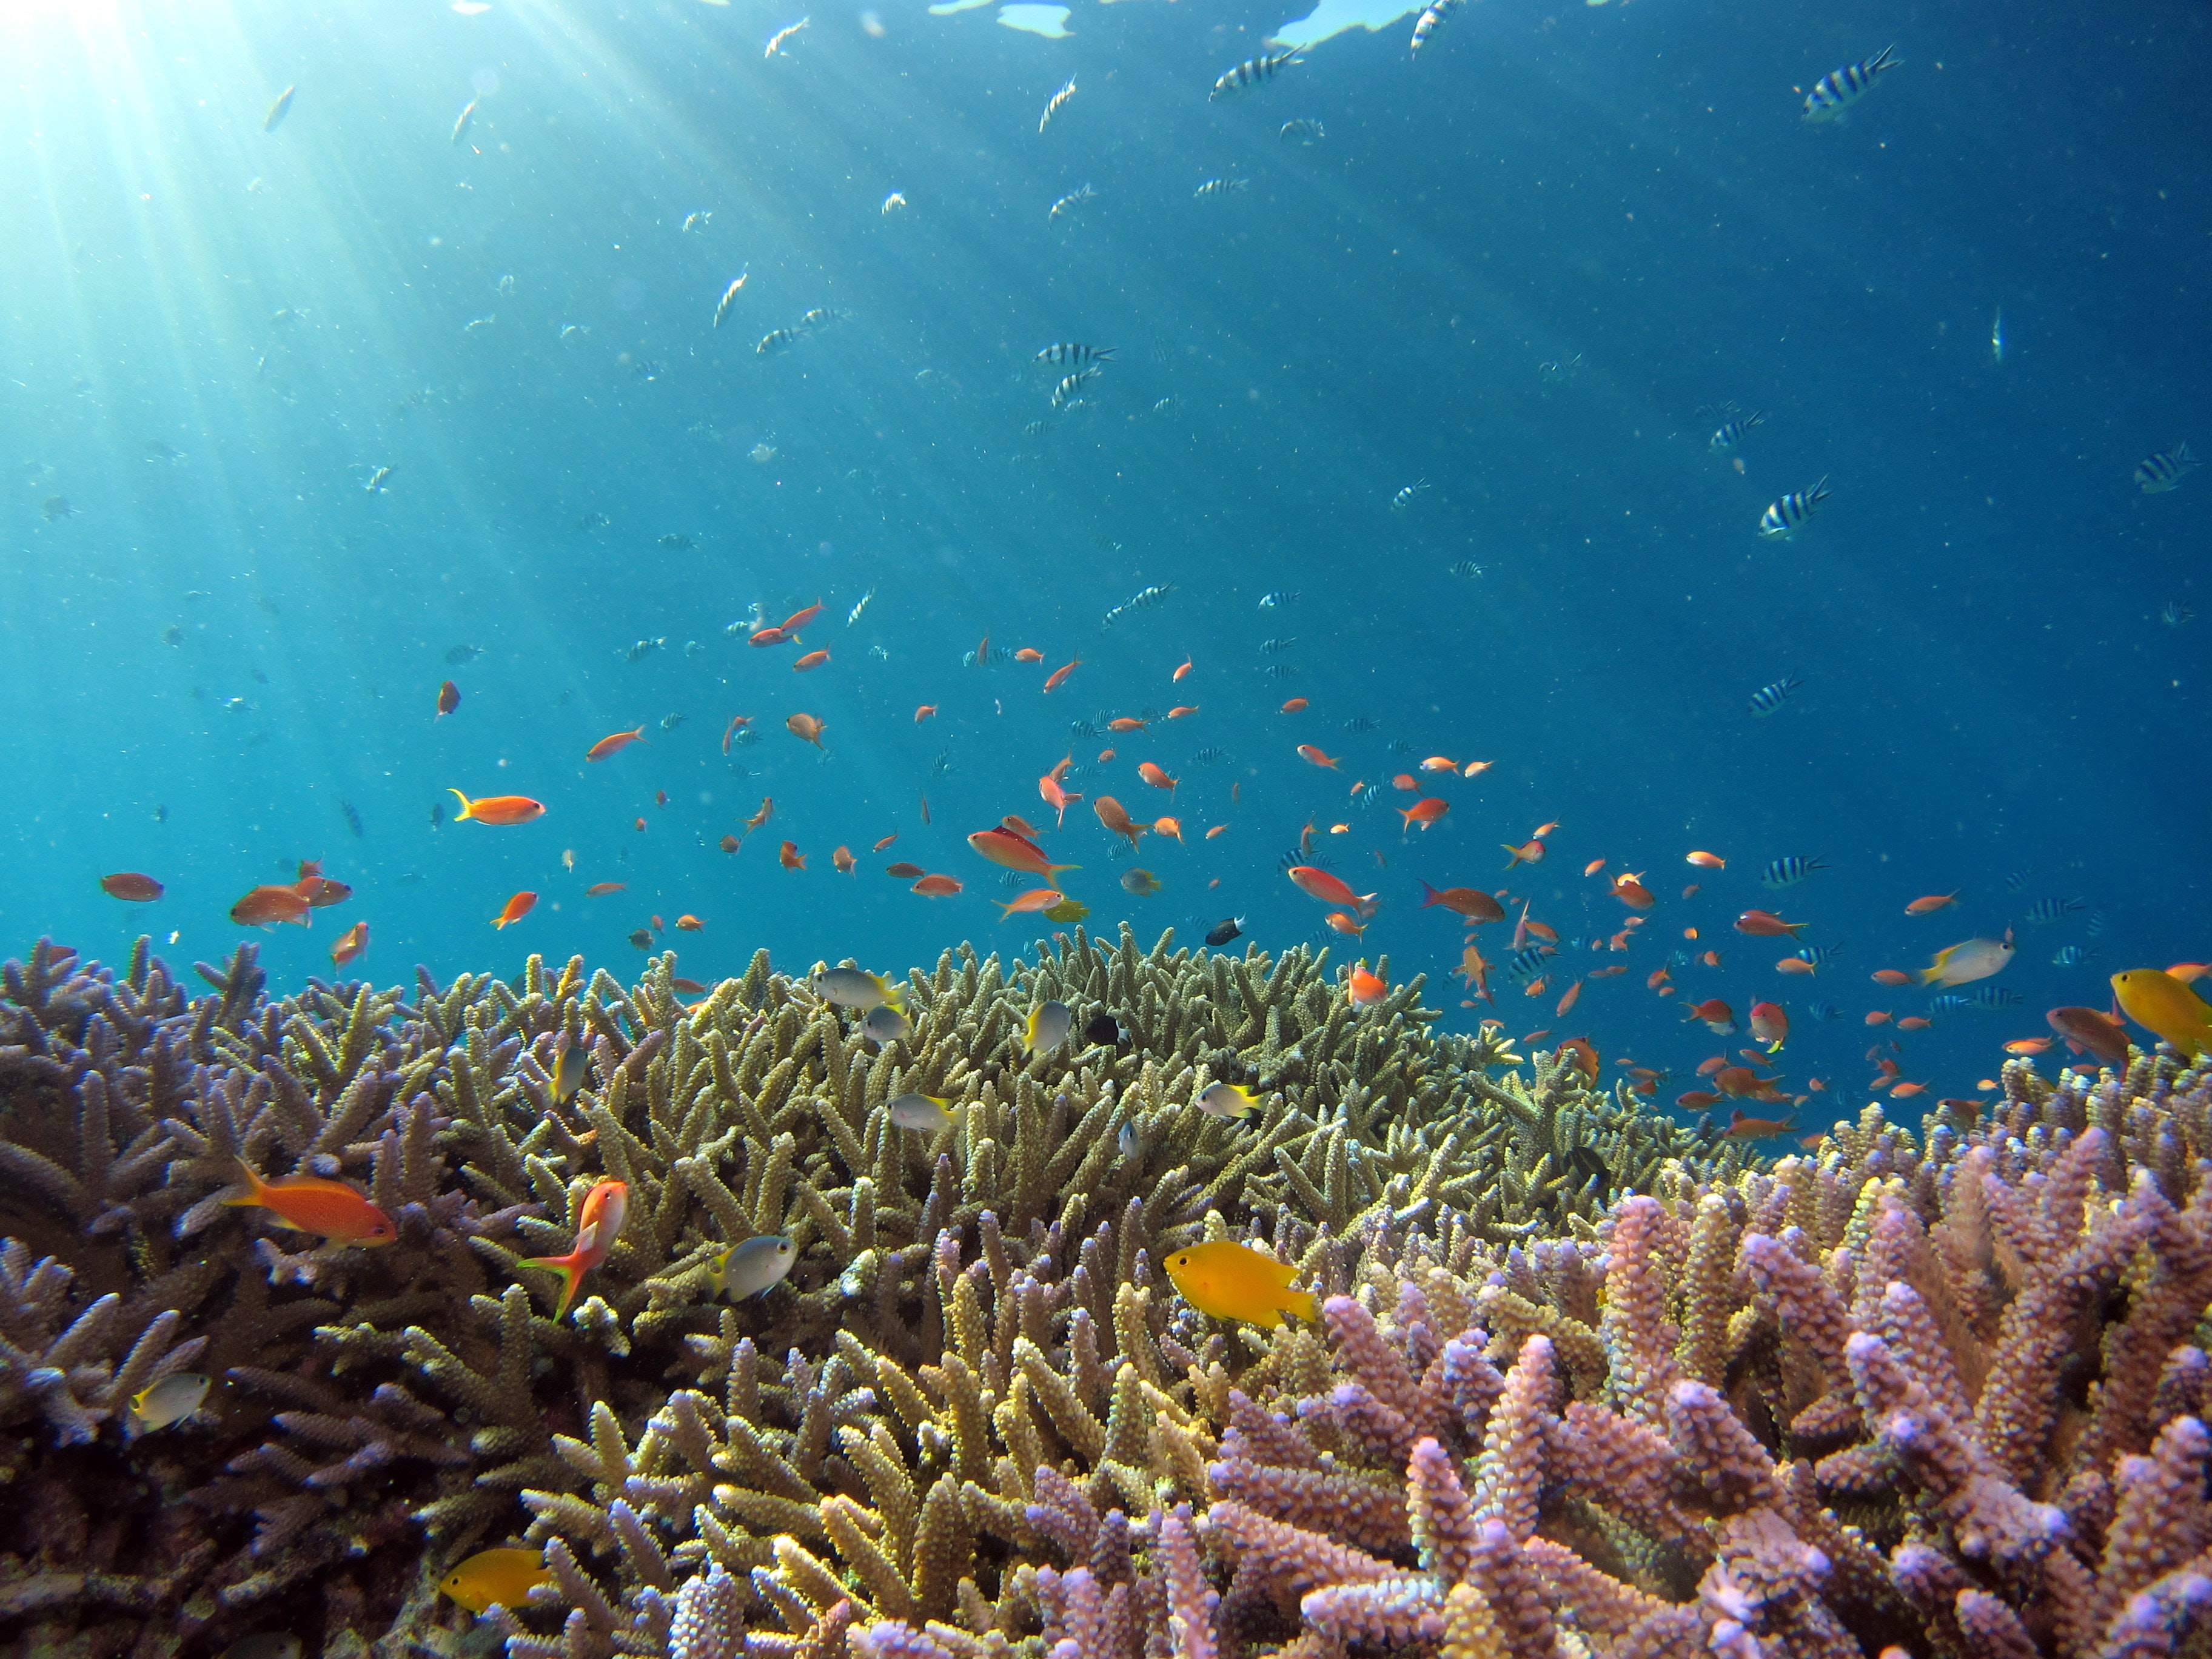 Supporting the Global Fund for Coral Reefs